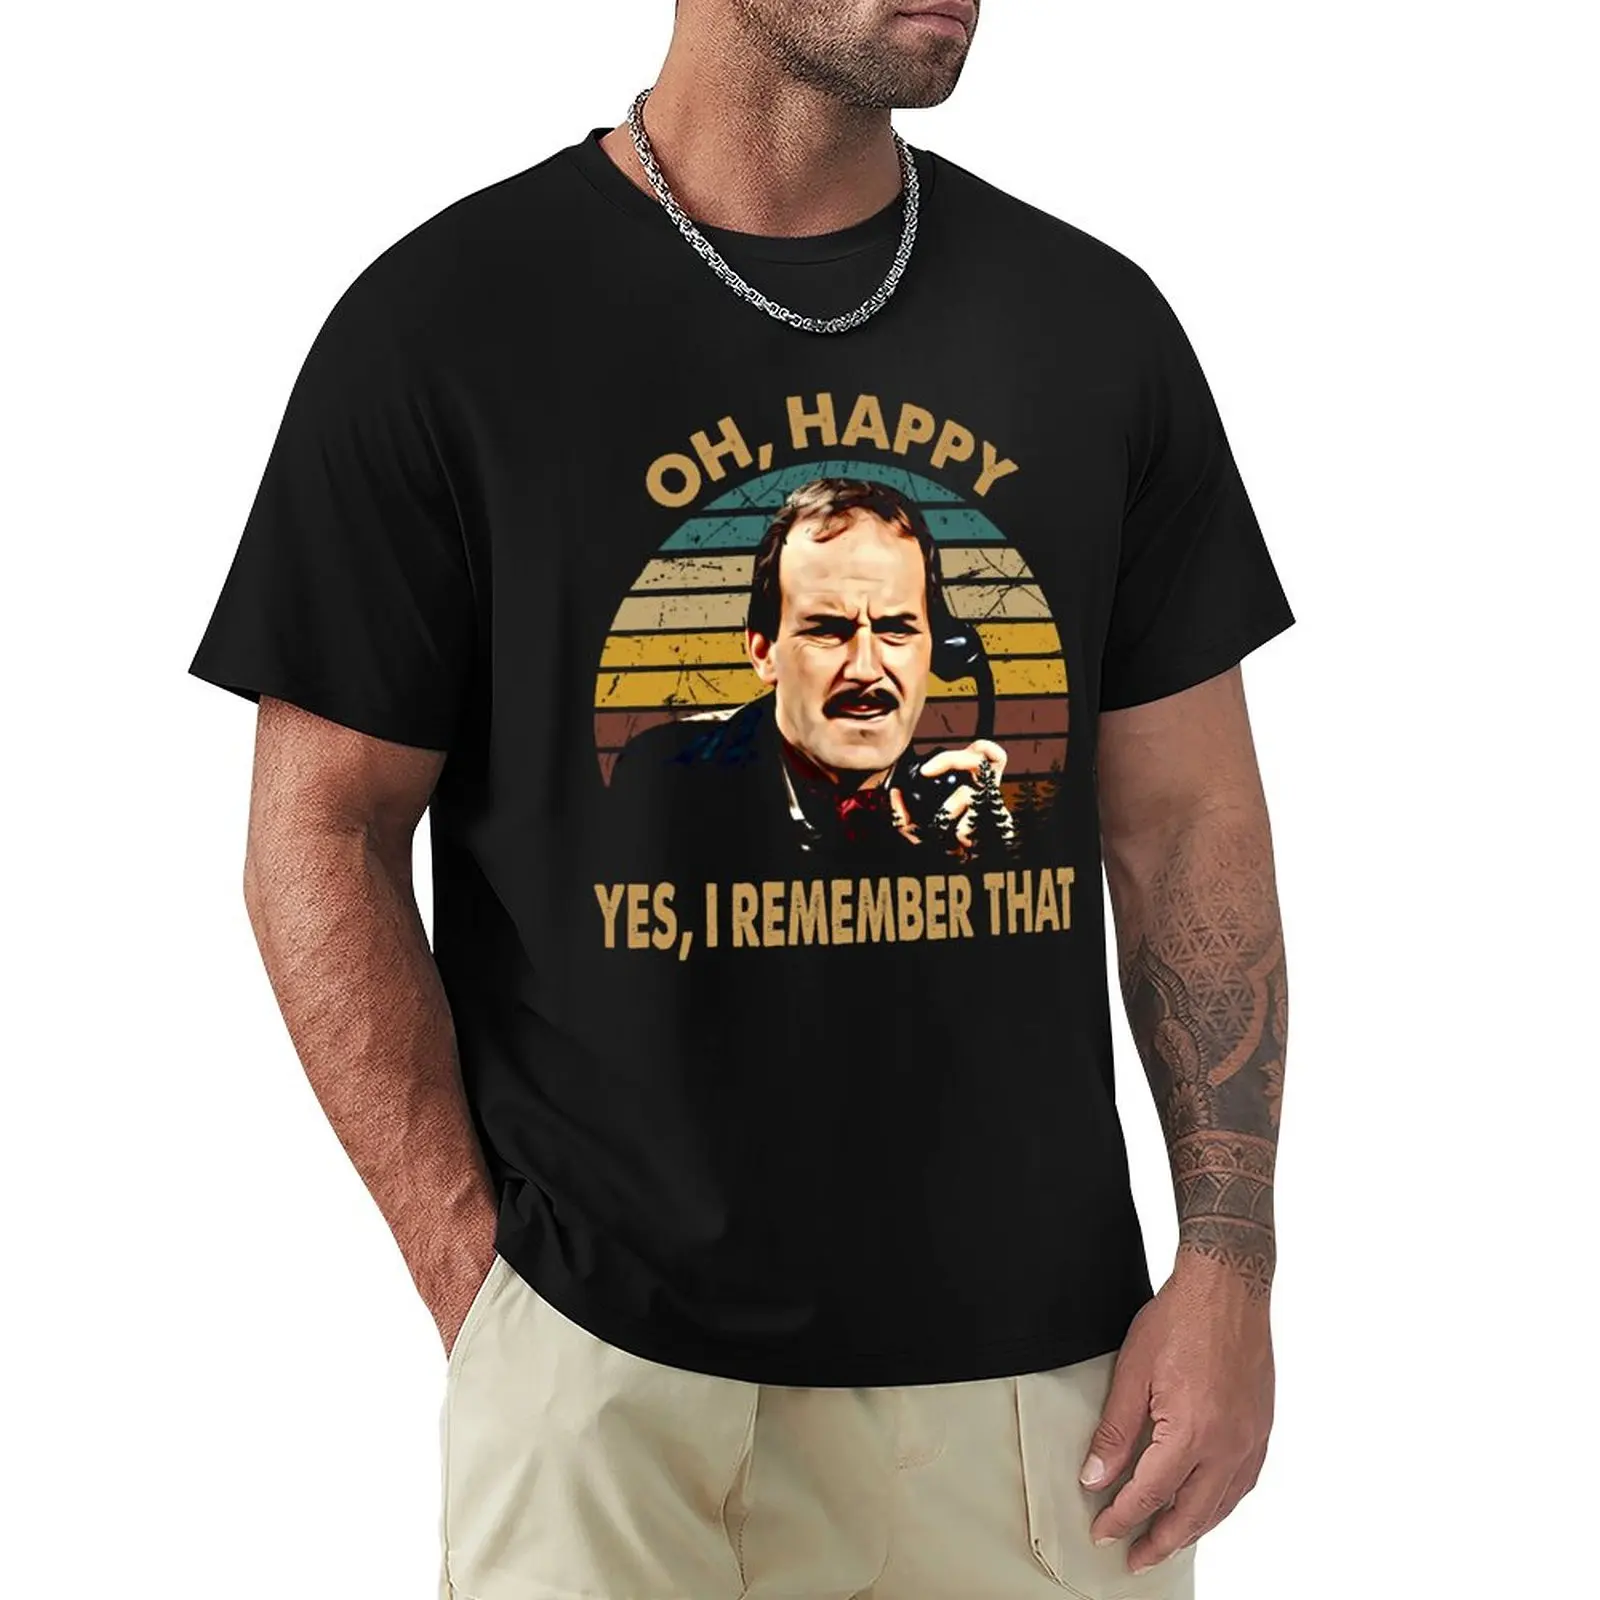 

Oh, Happy - Fawlty Arts Towers TV Series - Yes, I Remember That T-Shirt heavyweights new edition mens graphic t-shirts pack